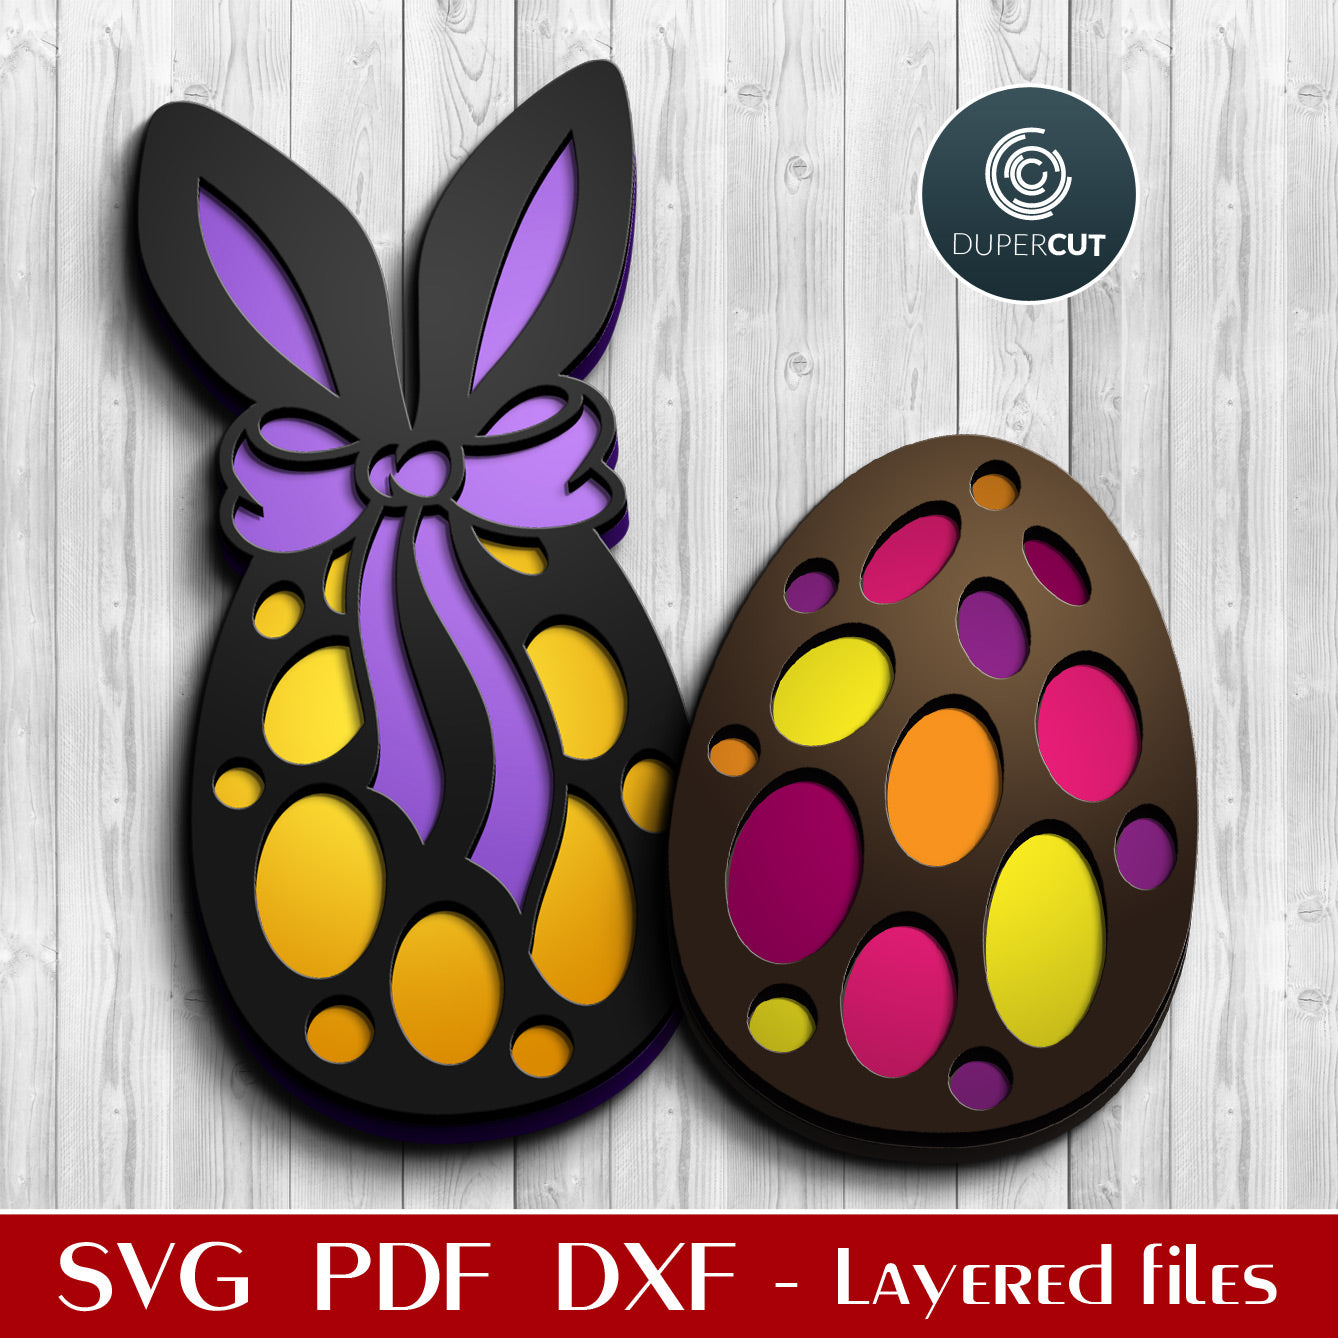 Polka dot and bunny ears Easter egg - SVG DXF layered vector files for laser cutting with Glowforge, Cricut, Silhouette Cameo, CNC plasma machines, scroll saw by DuperCut.com